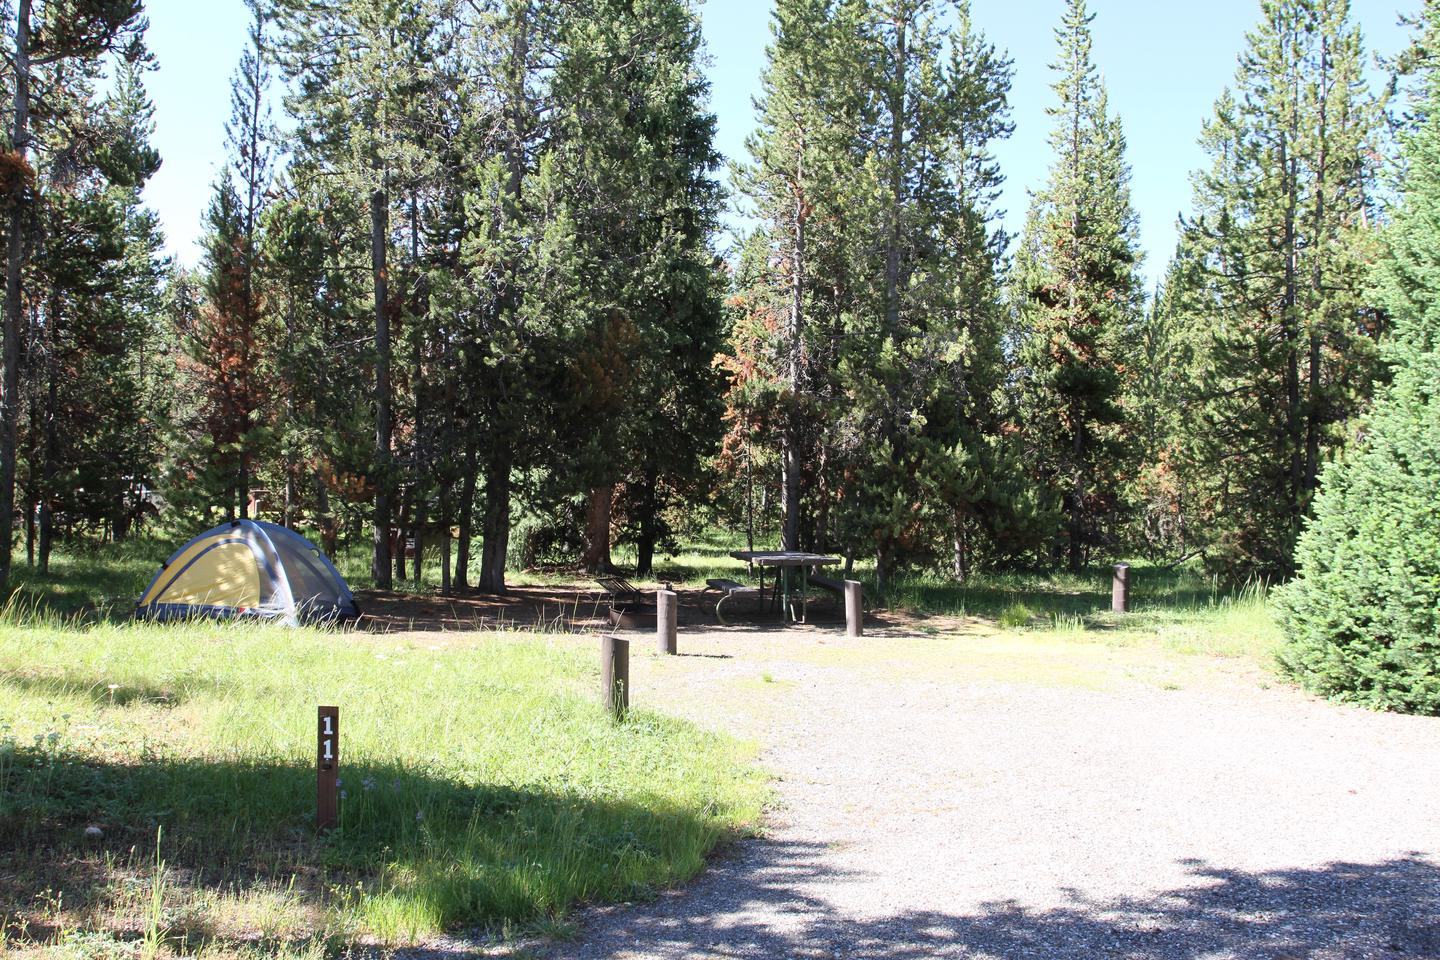 Indian Creek Campground site #11.